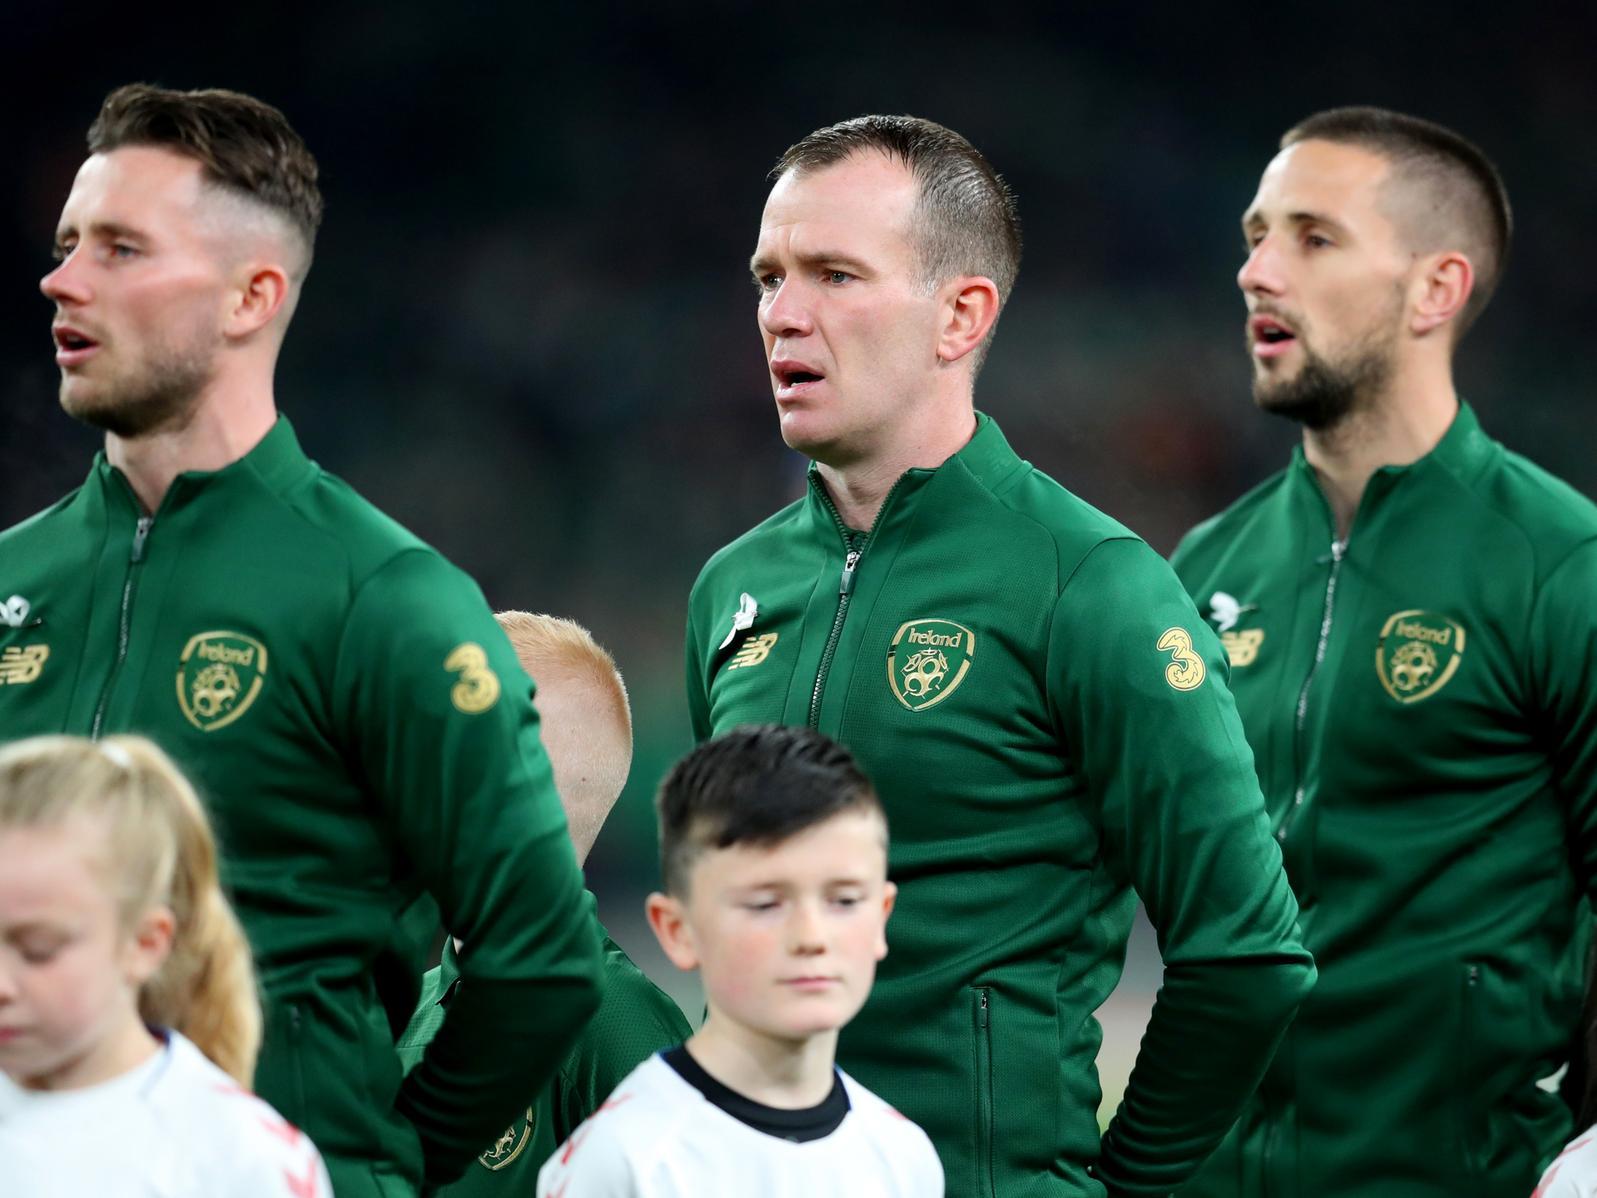 The 35-year-old Republic of Ireland international midfielder has something to prove after being frozen out by Daniel Stendel at Hearts. Has Premier League experience with Stoke and Aston Villa